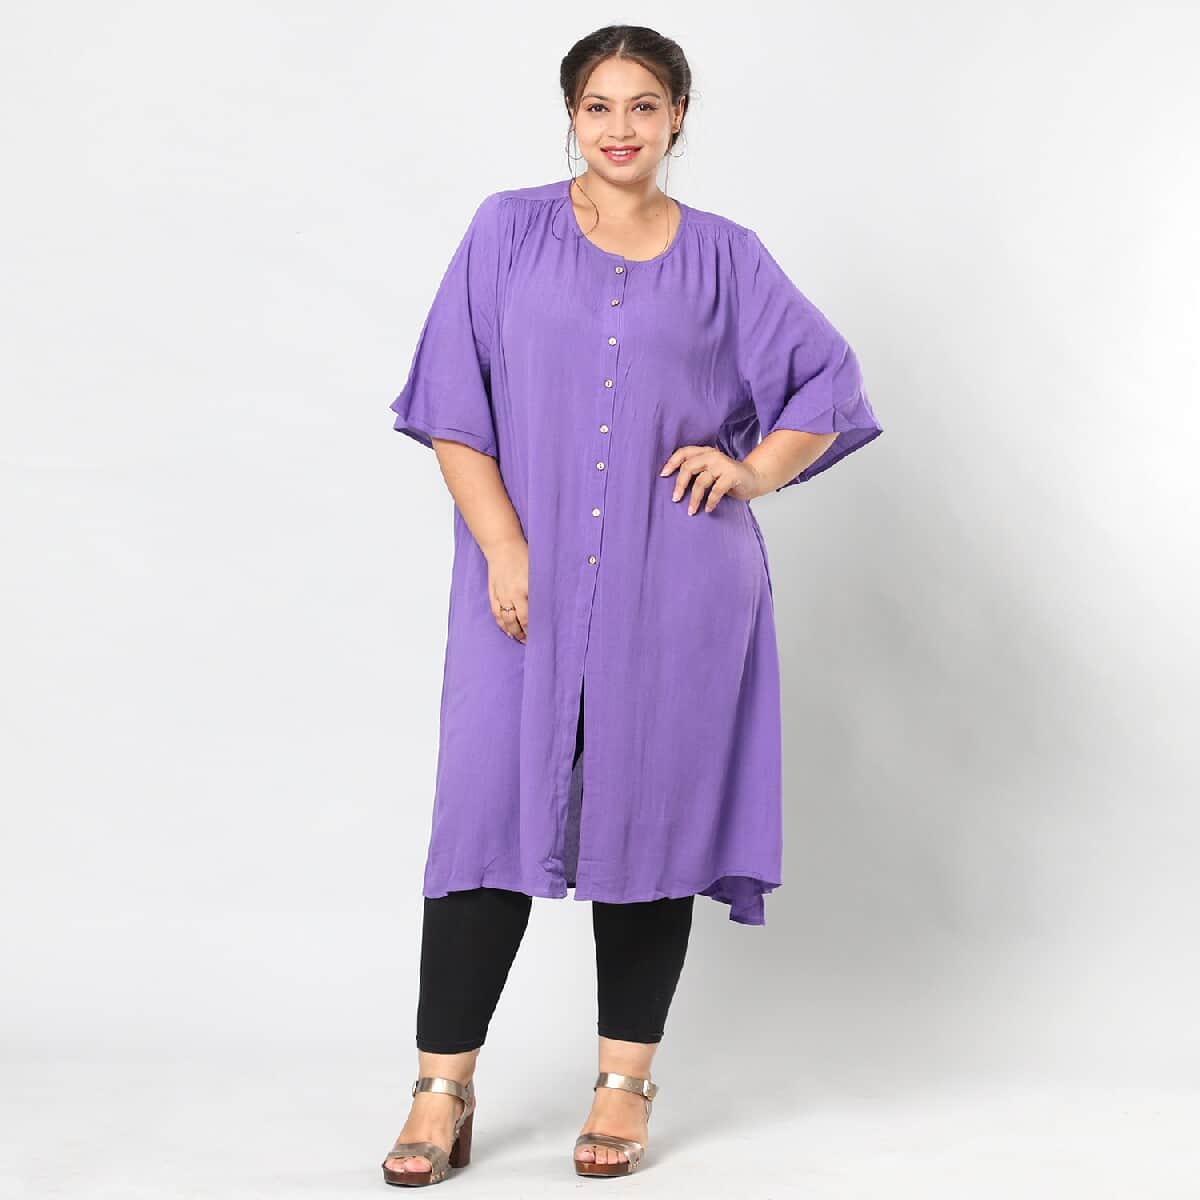 Purple 100% Rayon Top with Front Closure with Button- L/XL image number 1